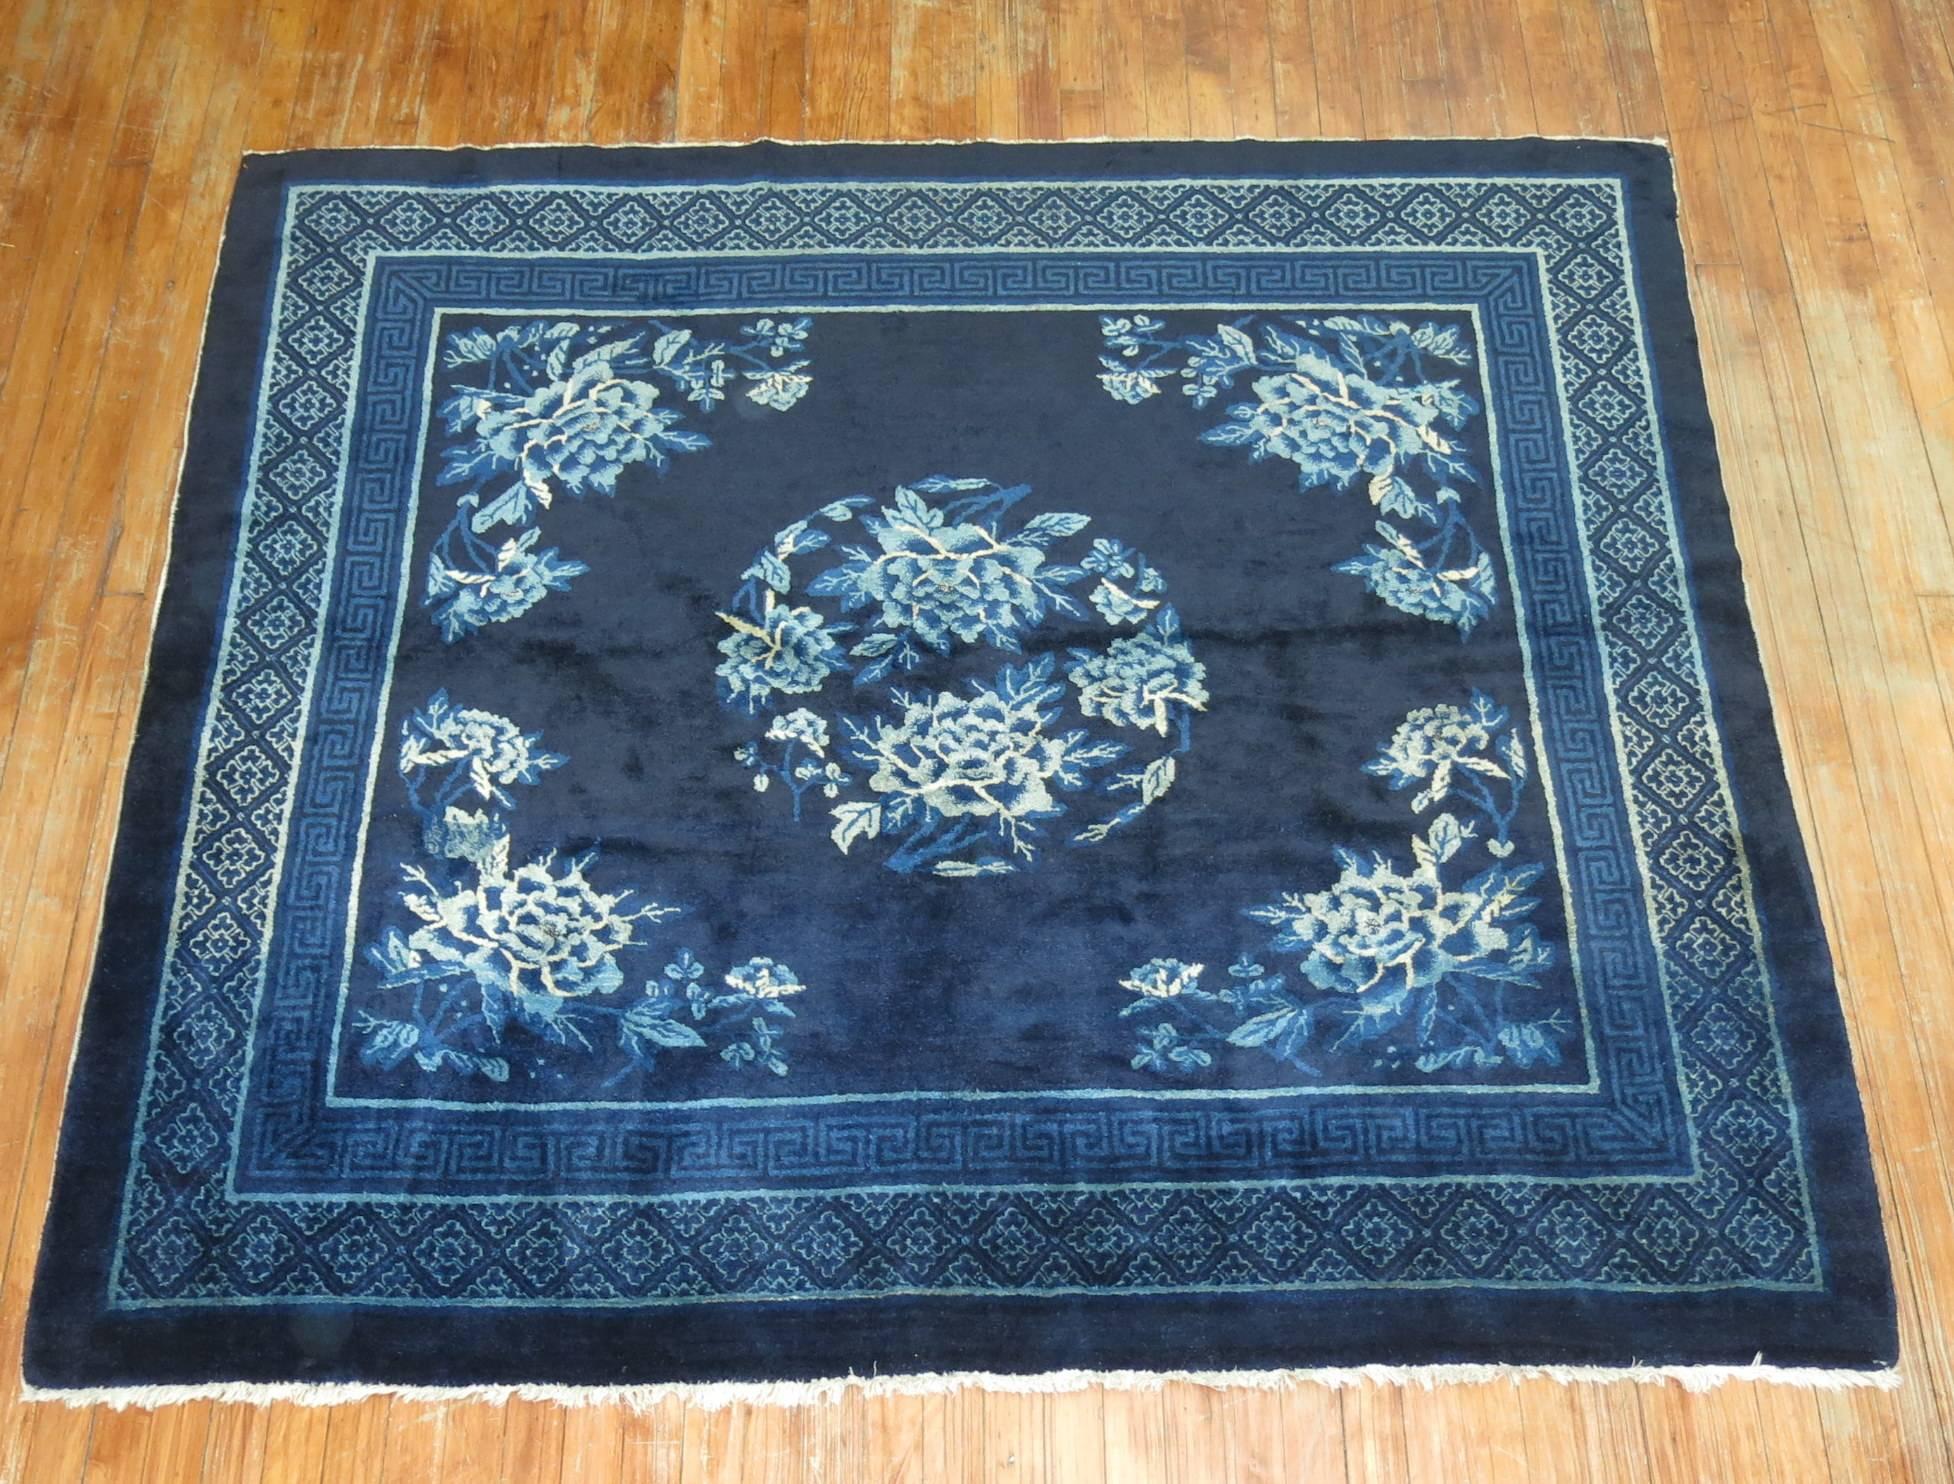 Hand-Woven Midnight Blue Antique Chinese Square Peking Rug